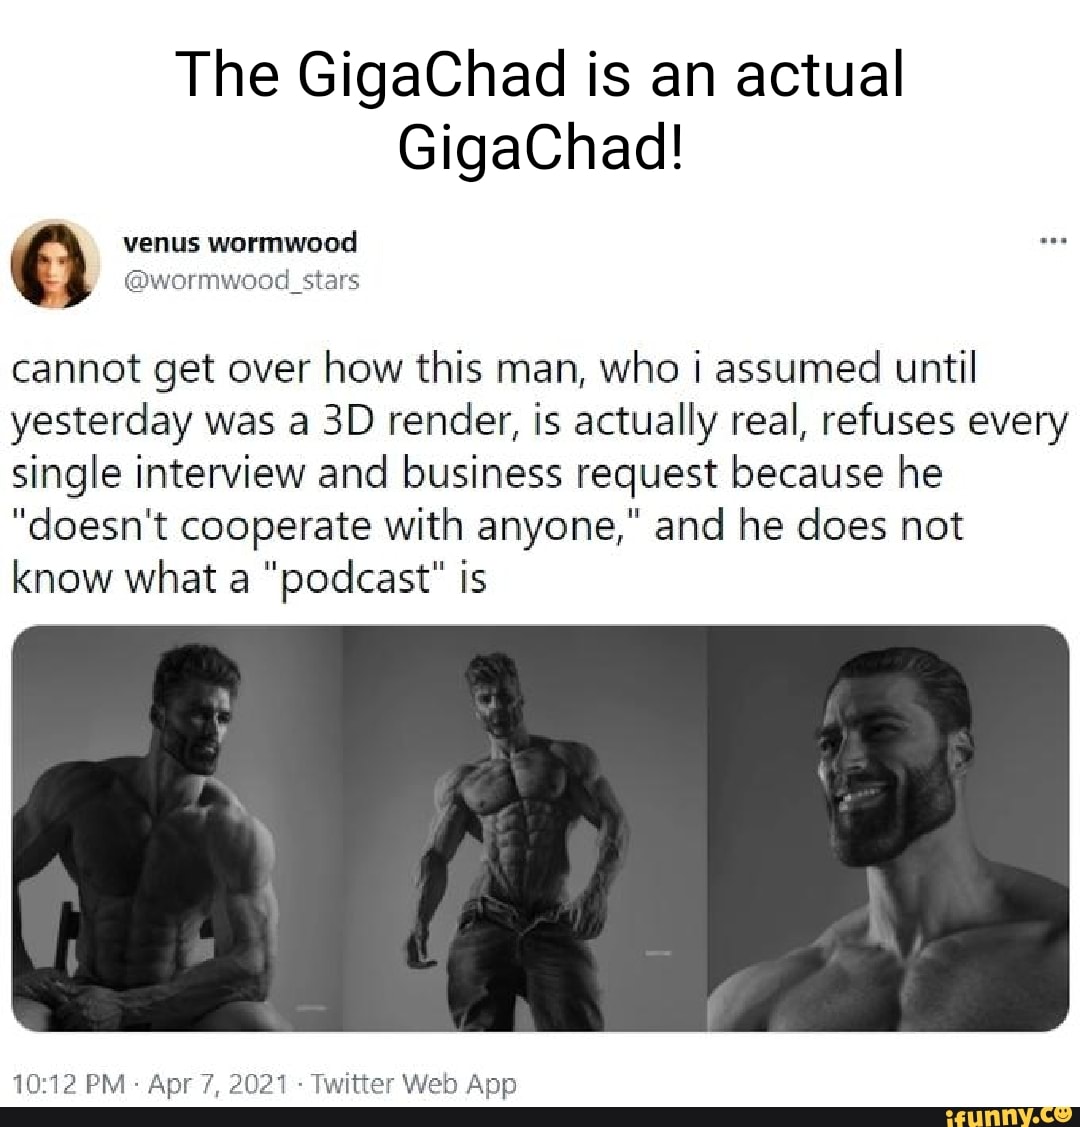 So apparently GigaChad is real and not just a CGI master piece